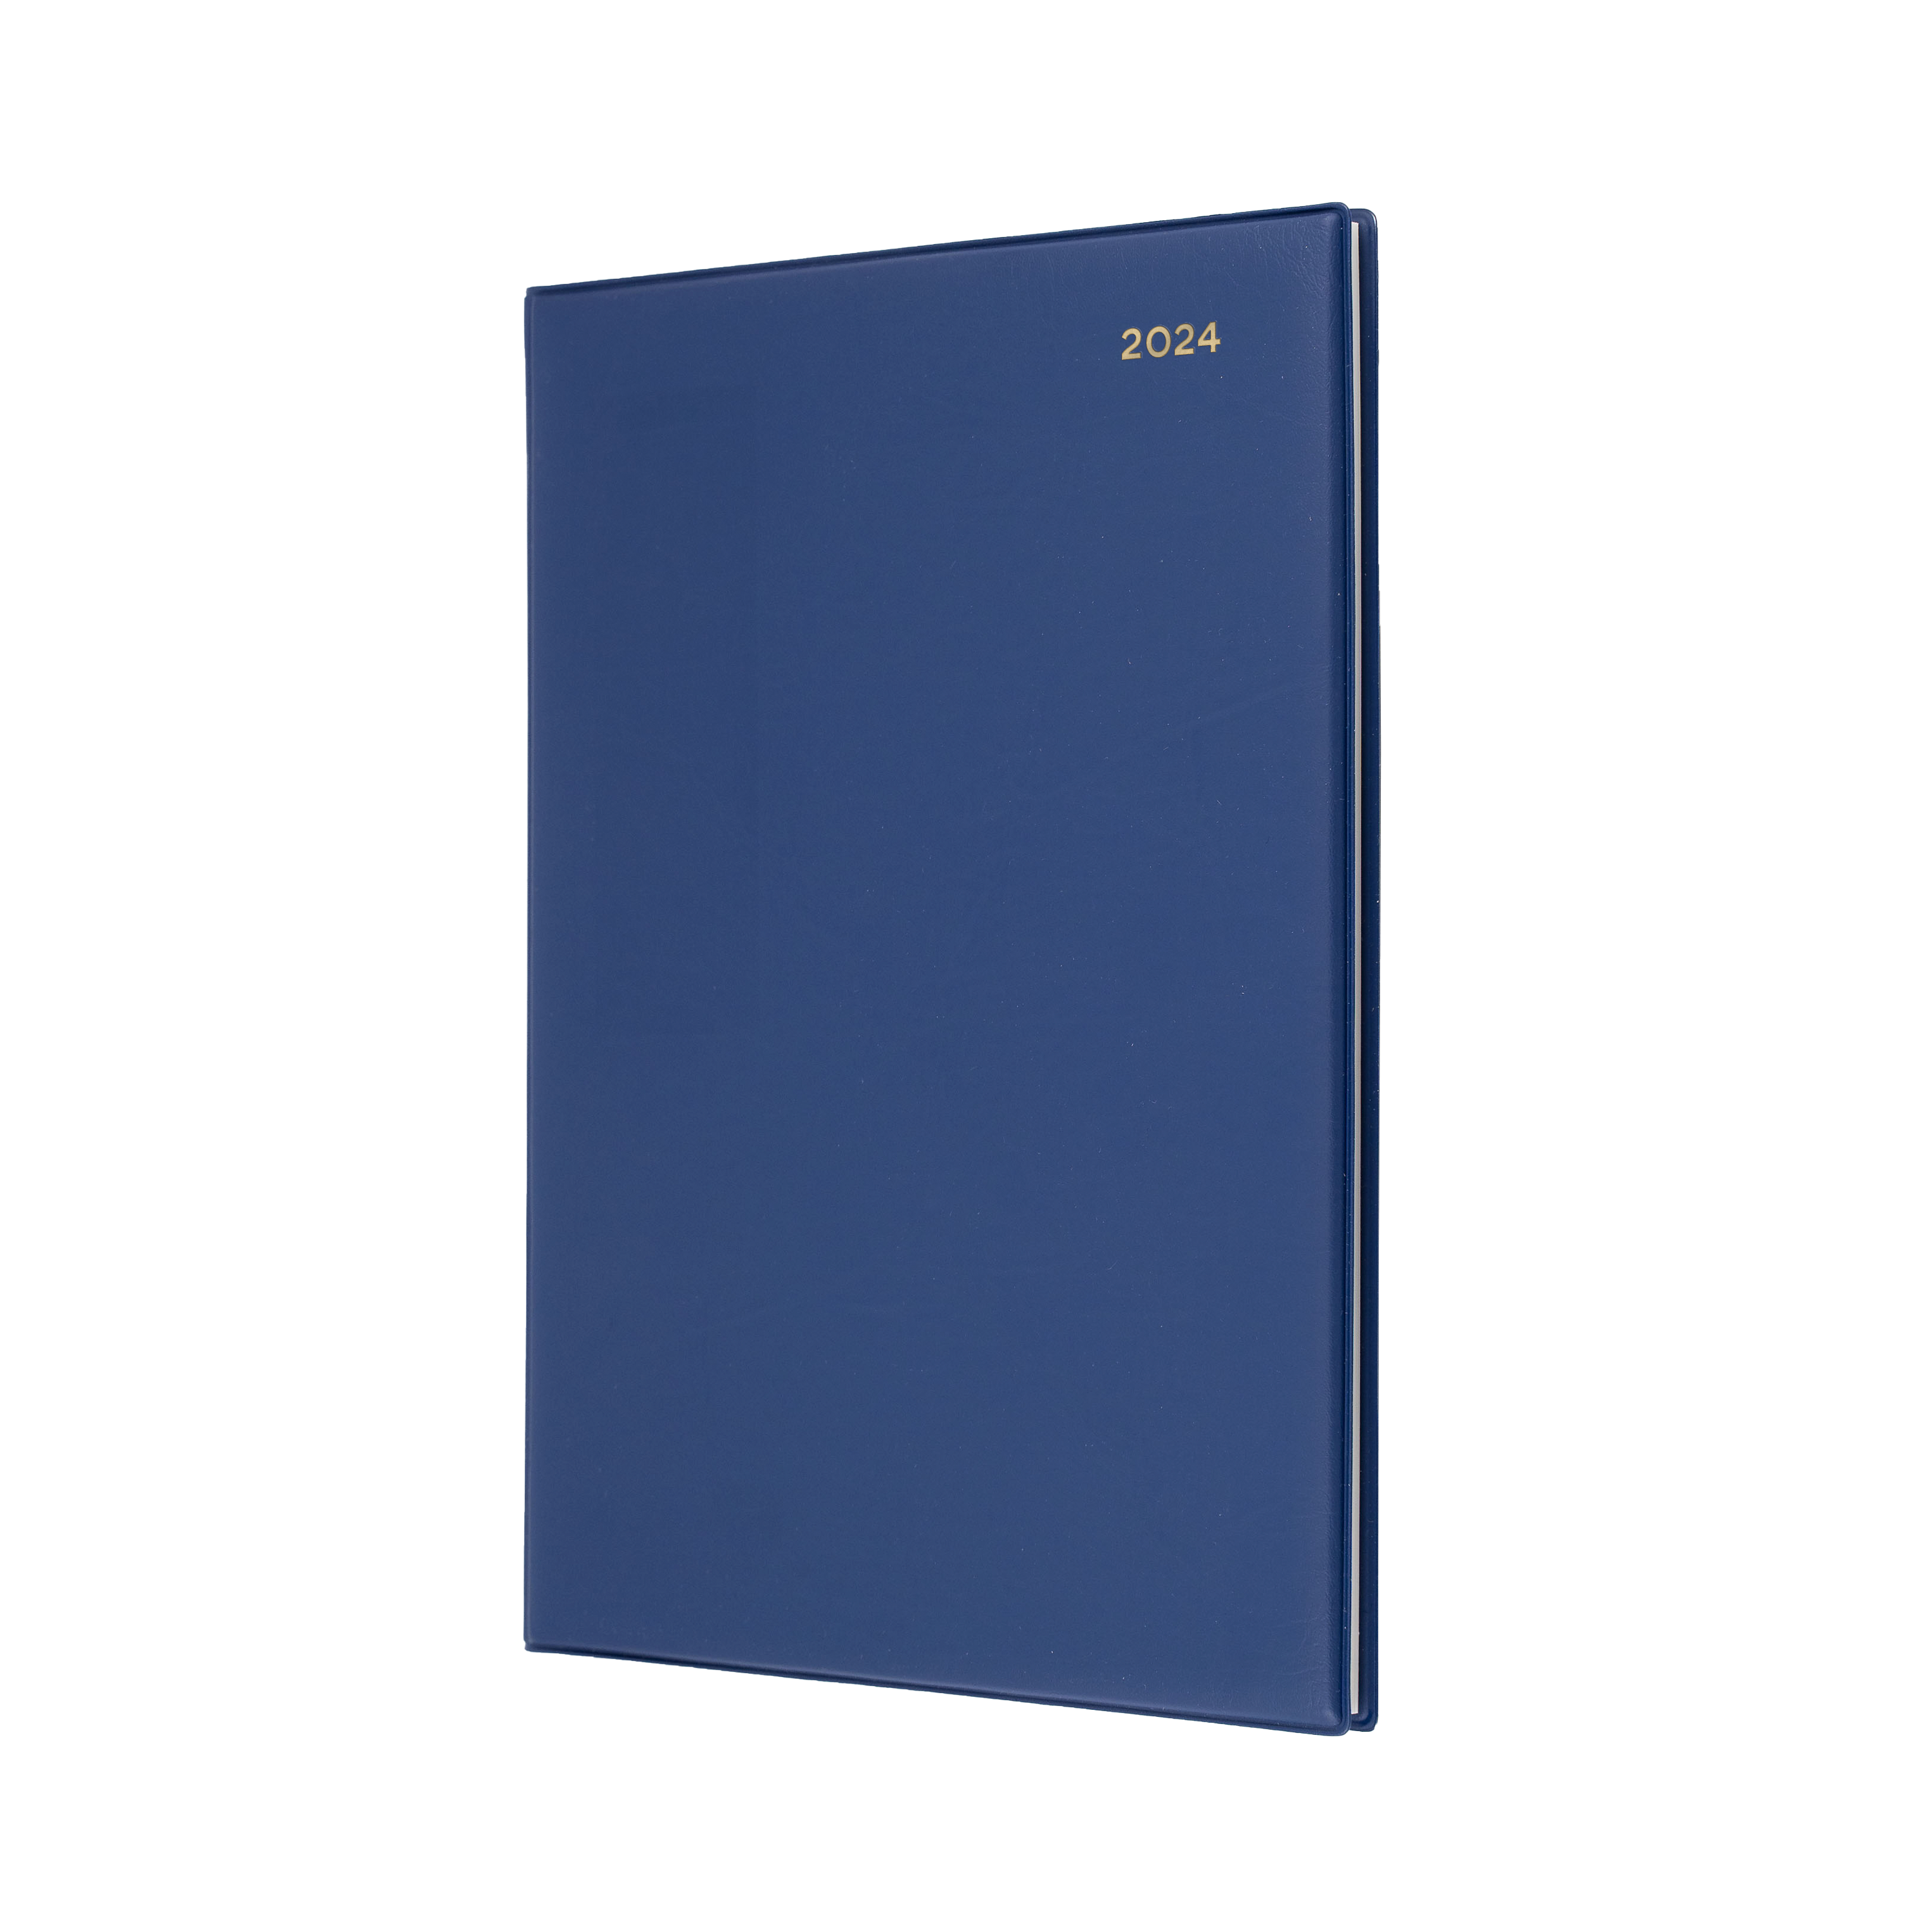 Belmont Desk 2024 Diary - 2 Days to a Page, Size A4 Navy / A4 (297 x 210mm)